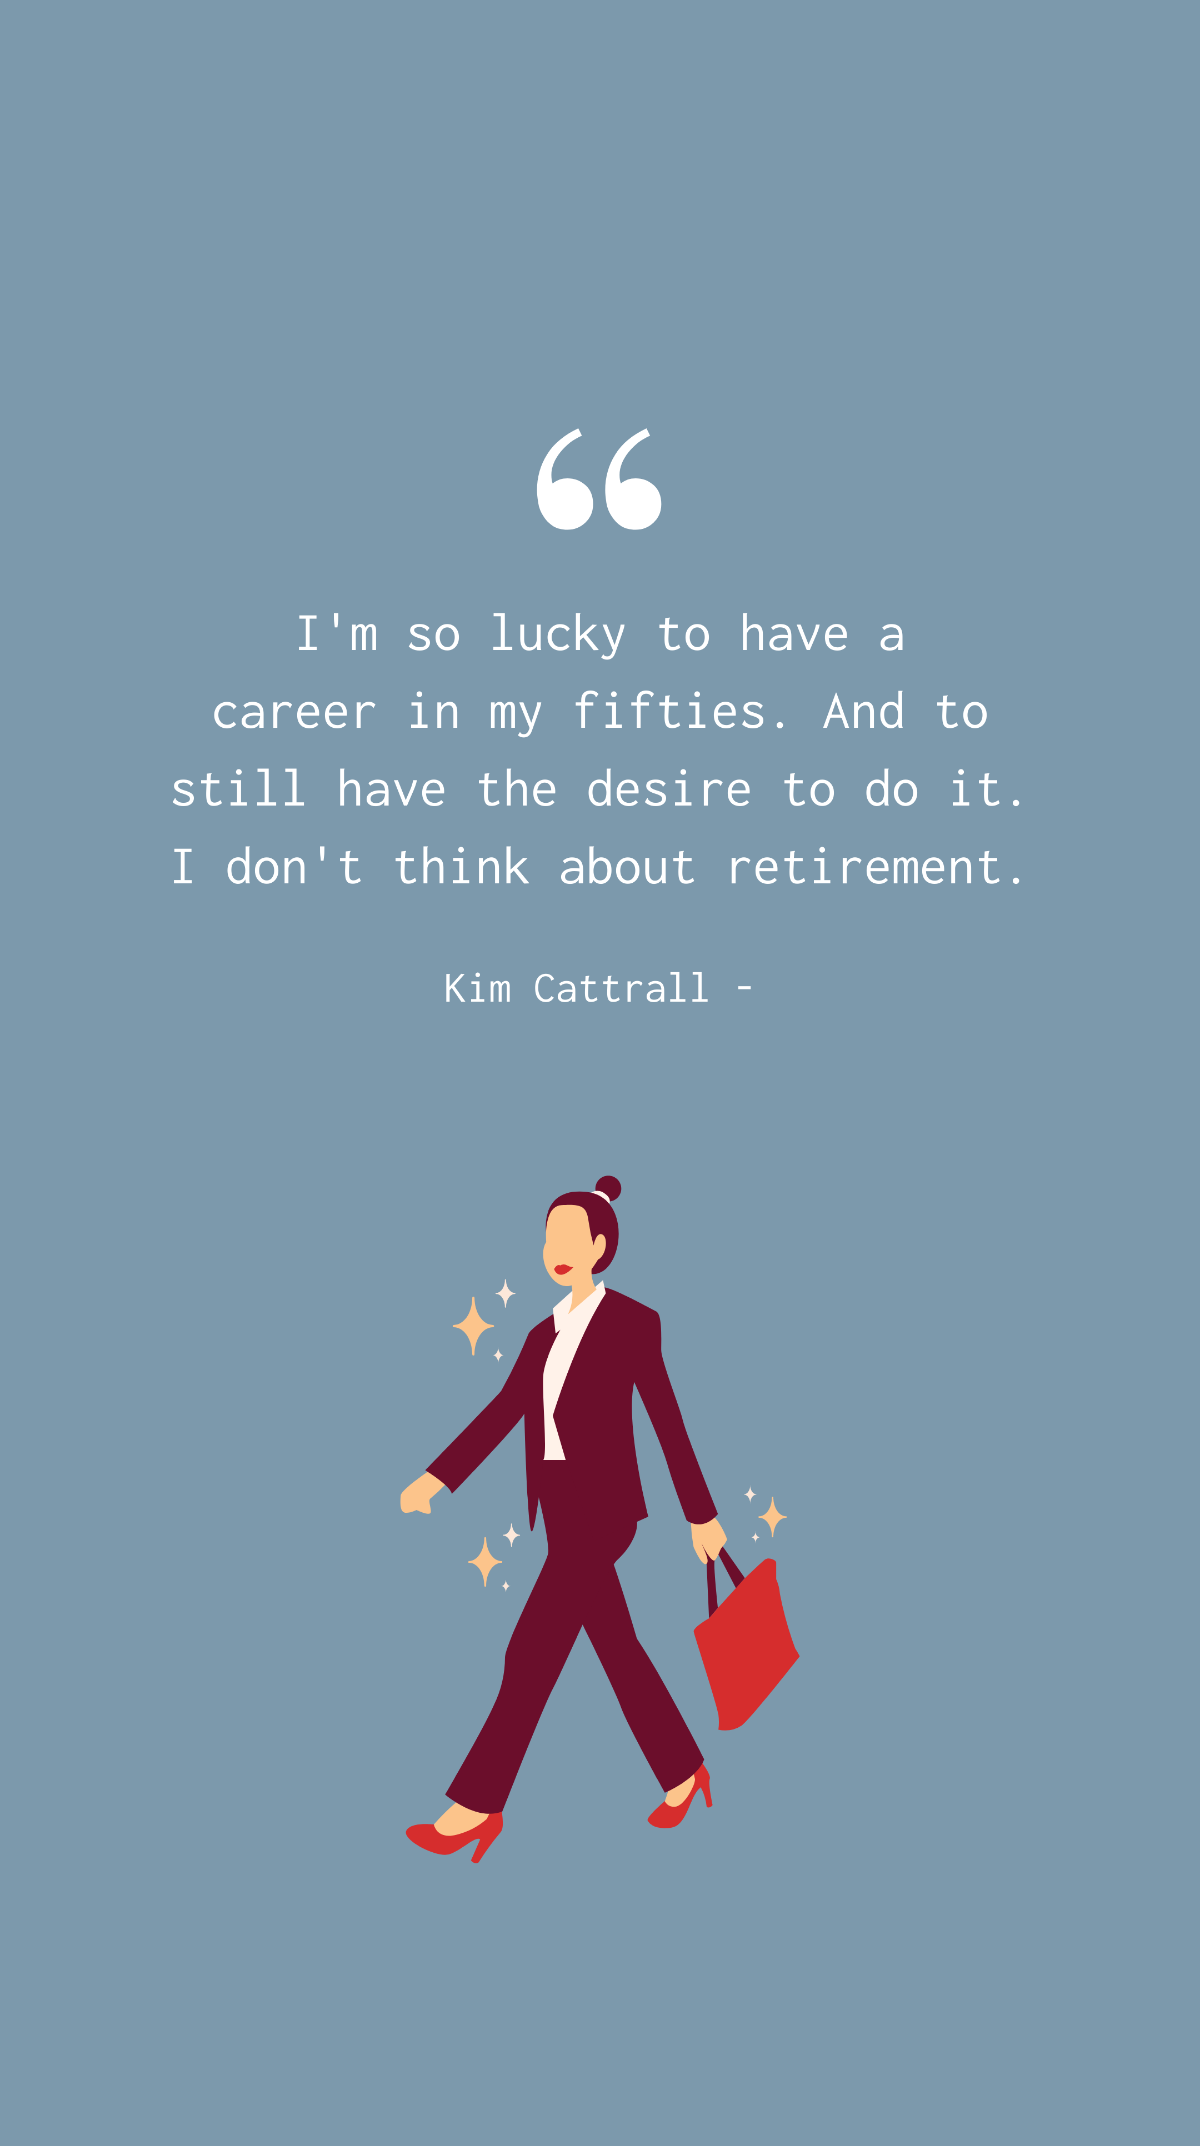 Free Kim Cattrall - I'm so lucky to have a career in my fifties. And to still have the desire to do it. I don't think about retirement. Template